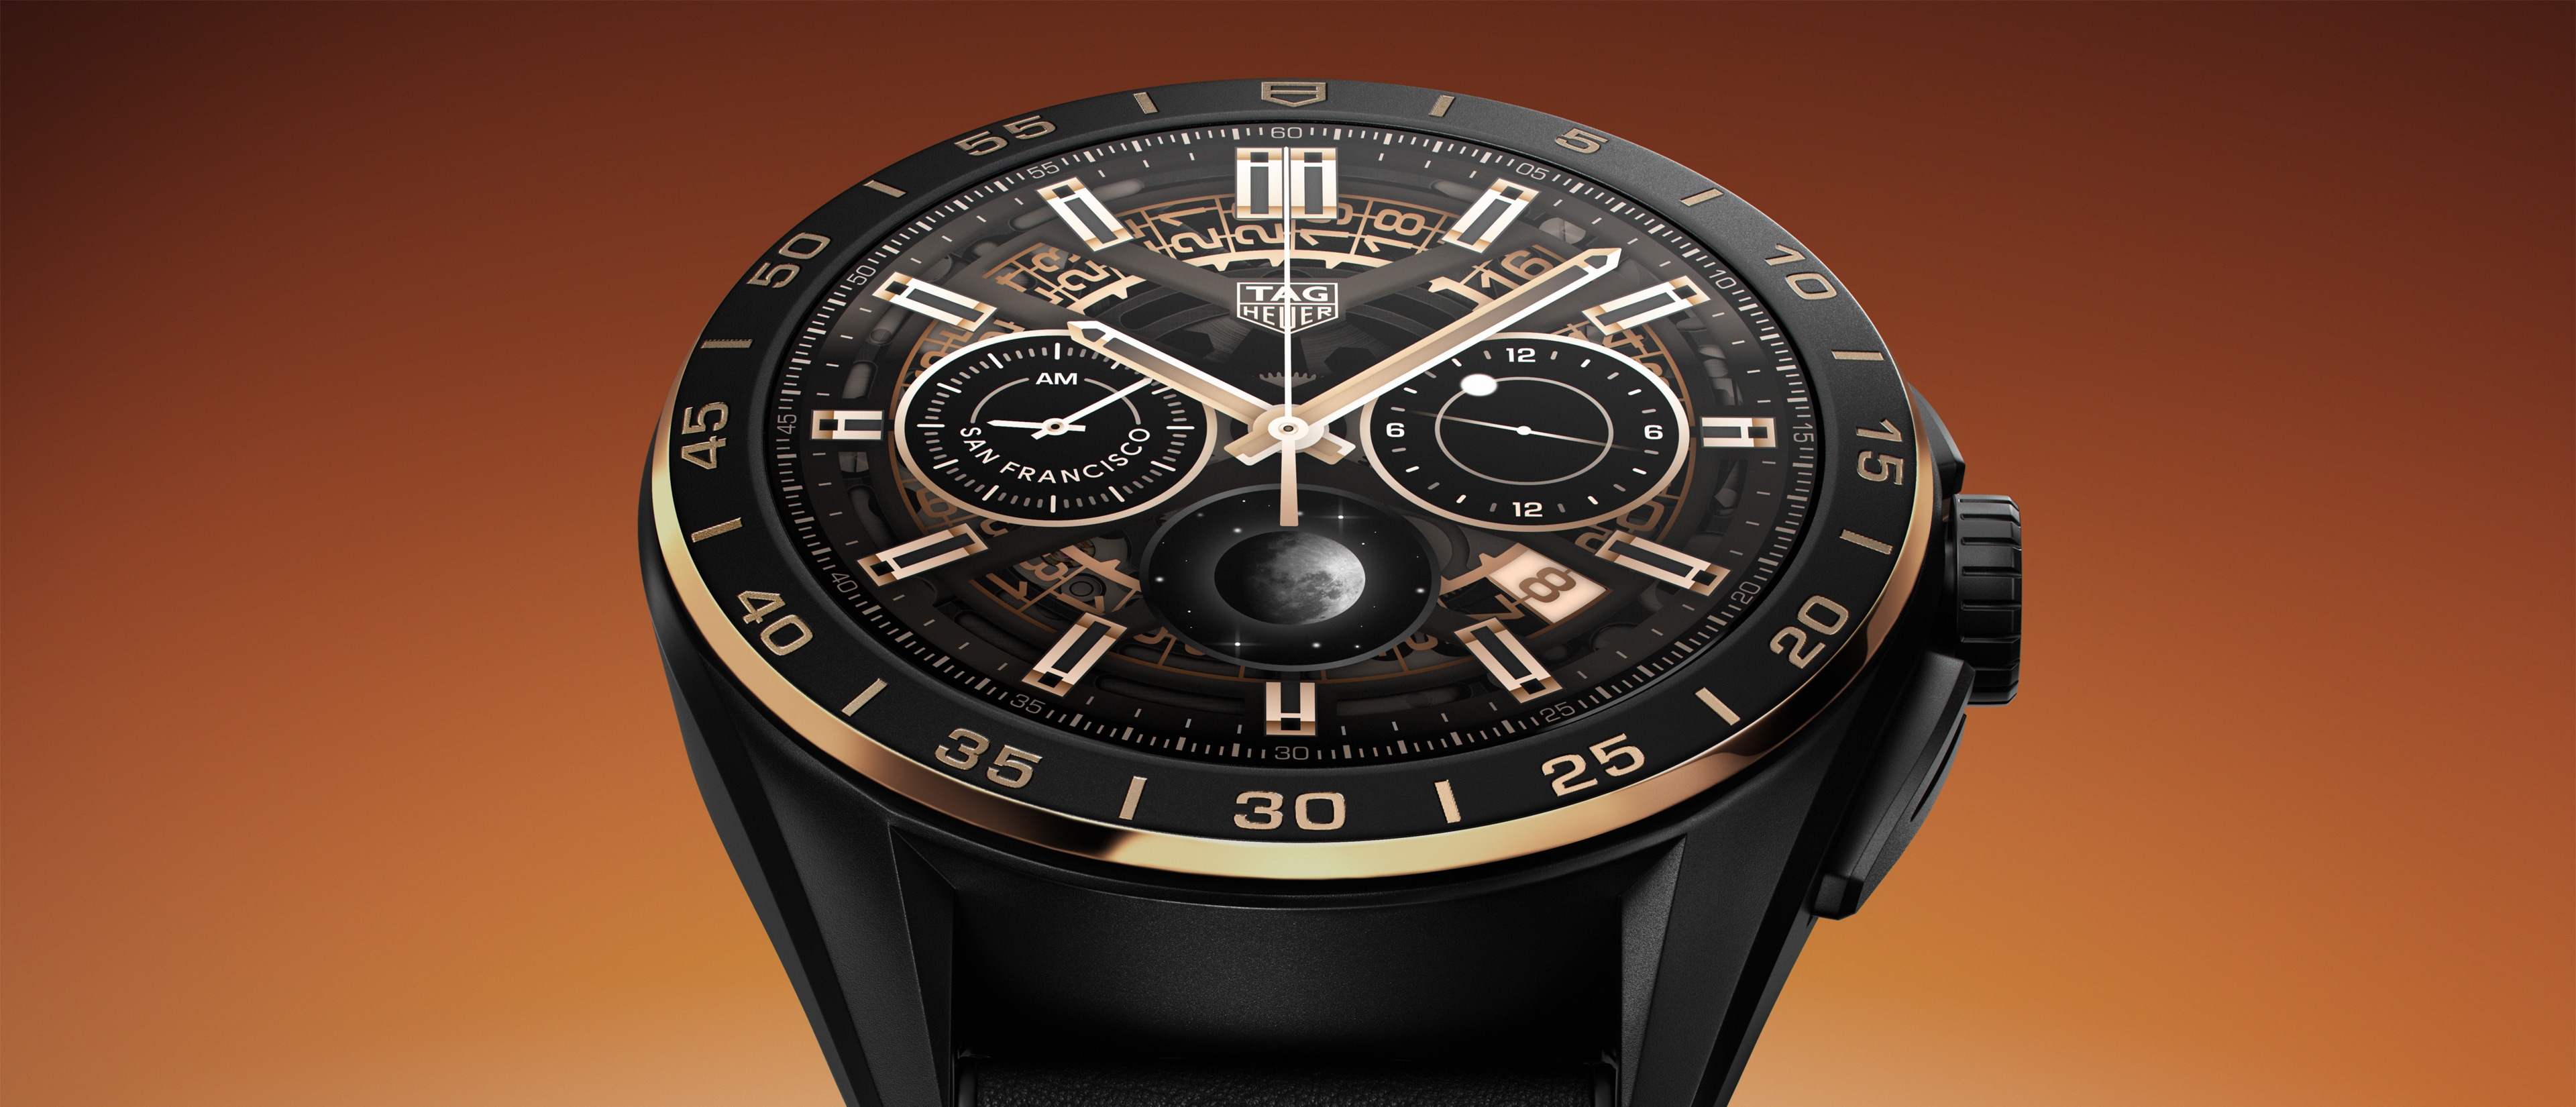 TAG Heuer Connected Display and Interface